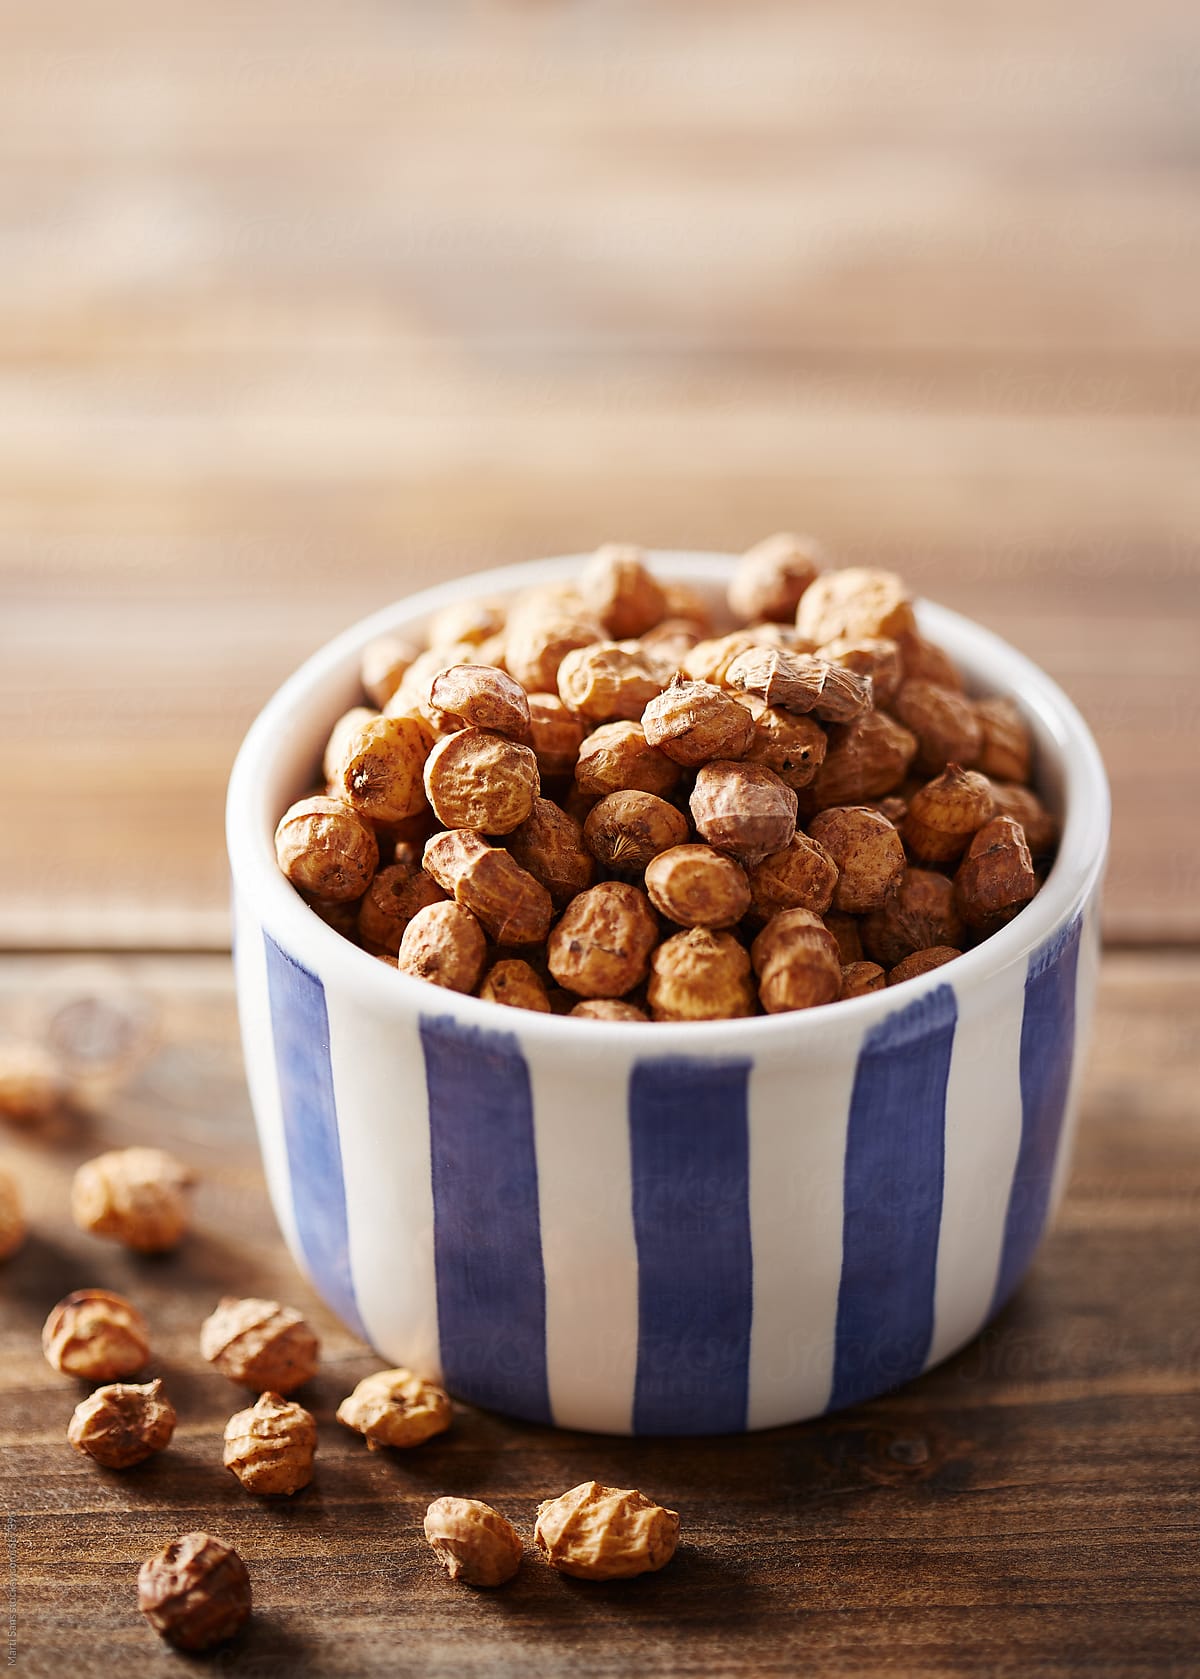 Tiger nuts in a bowl